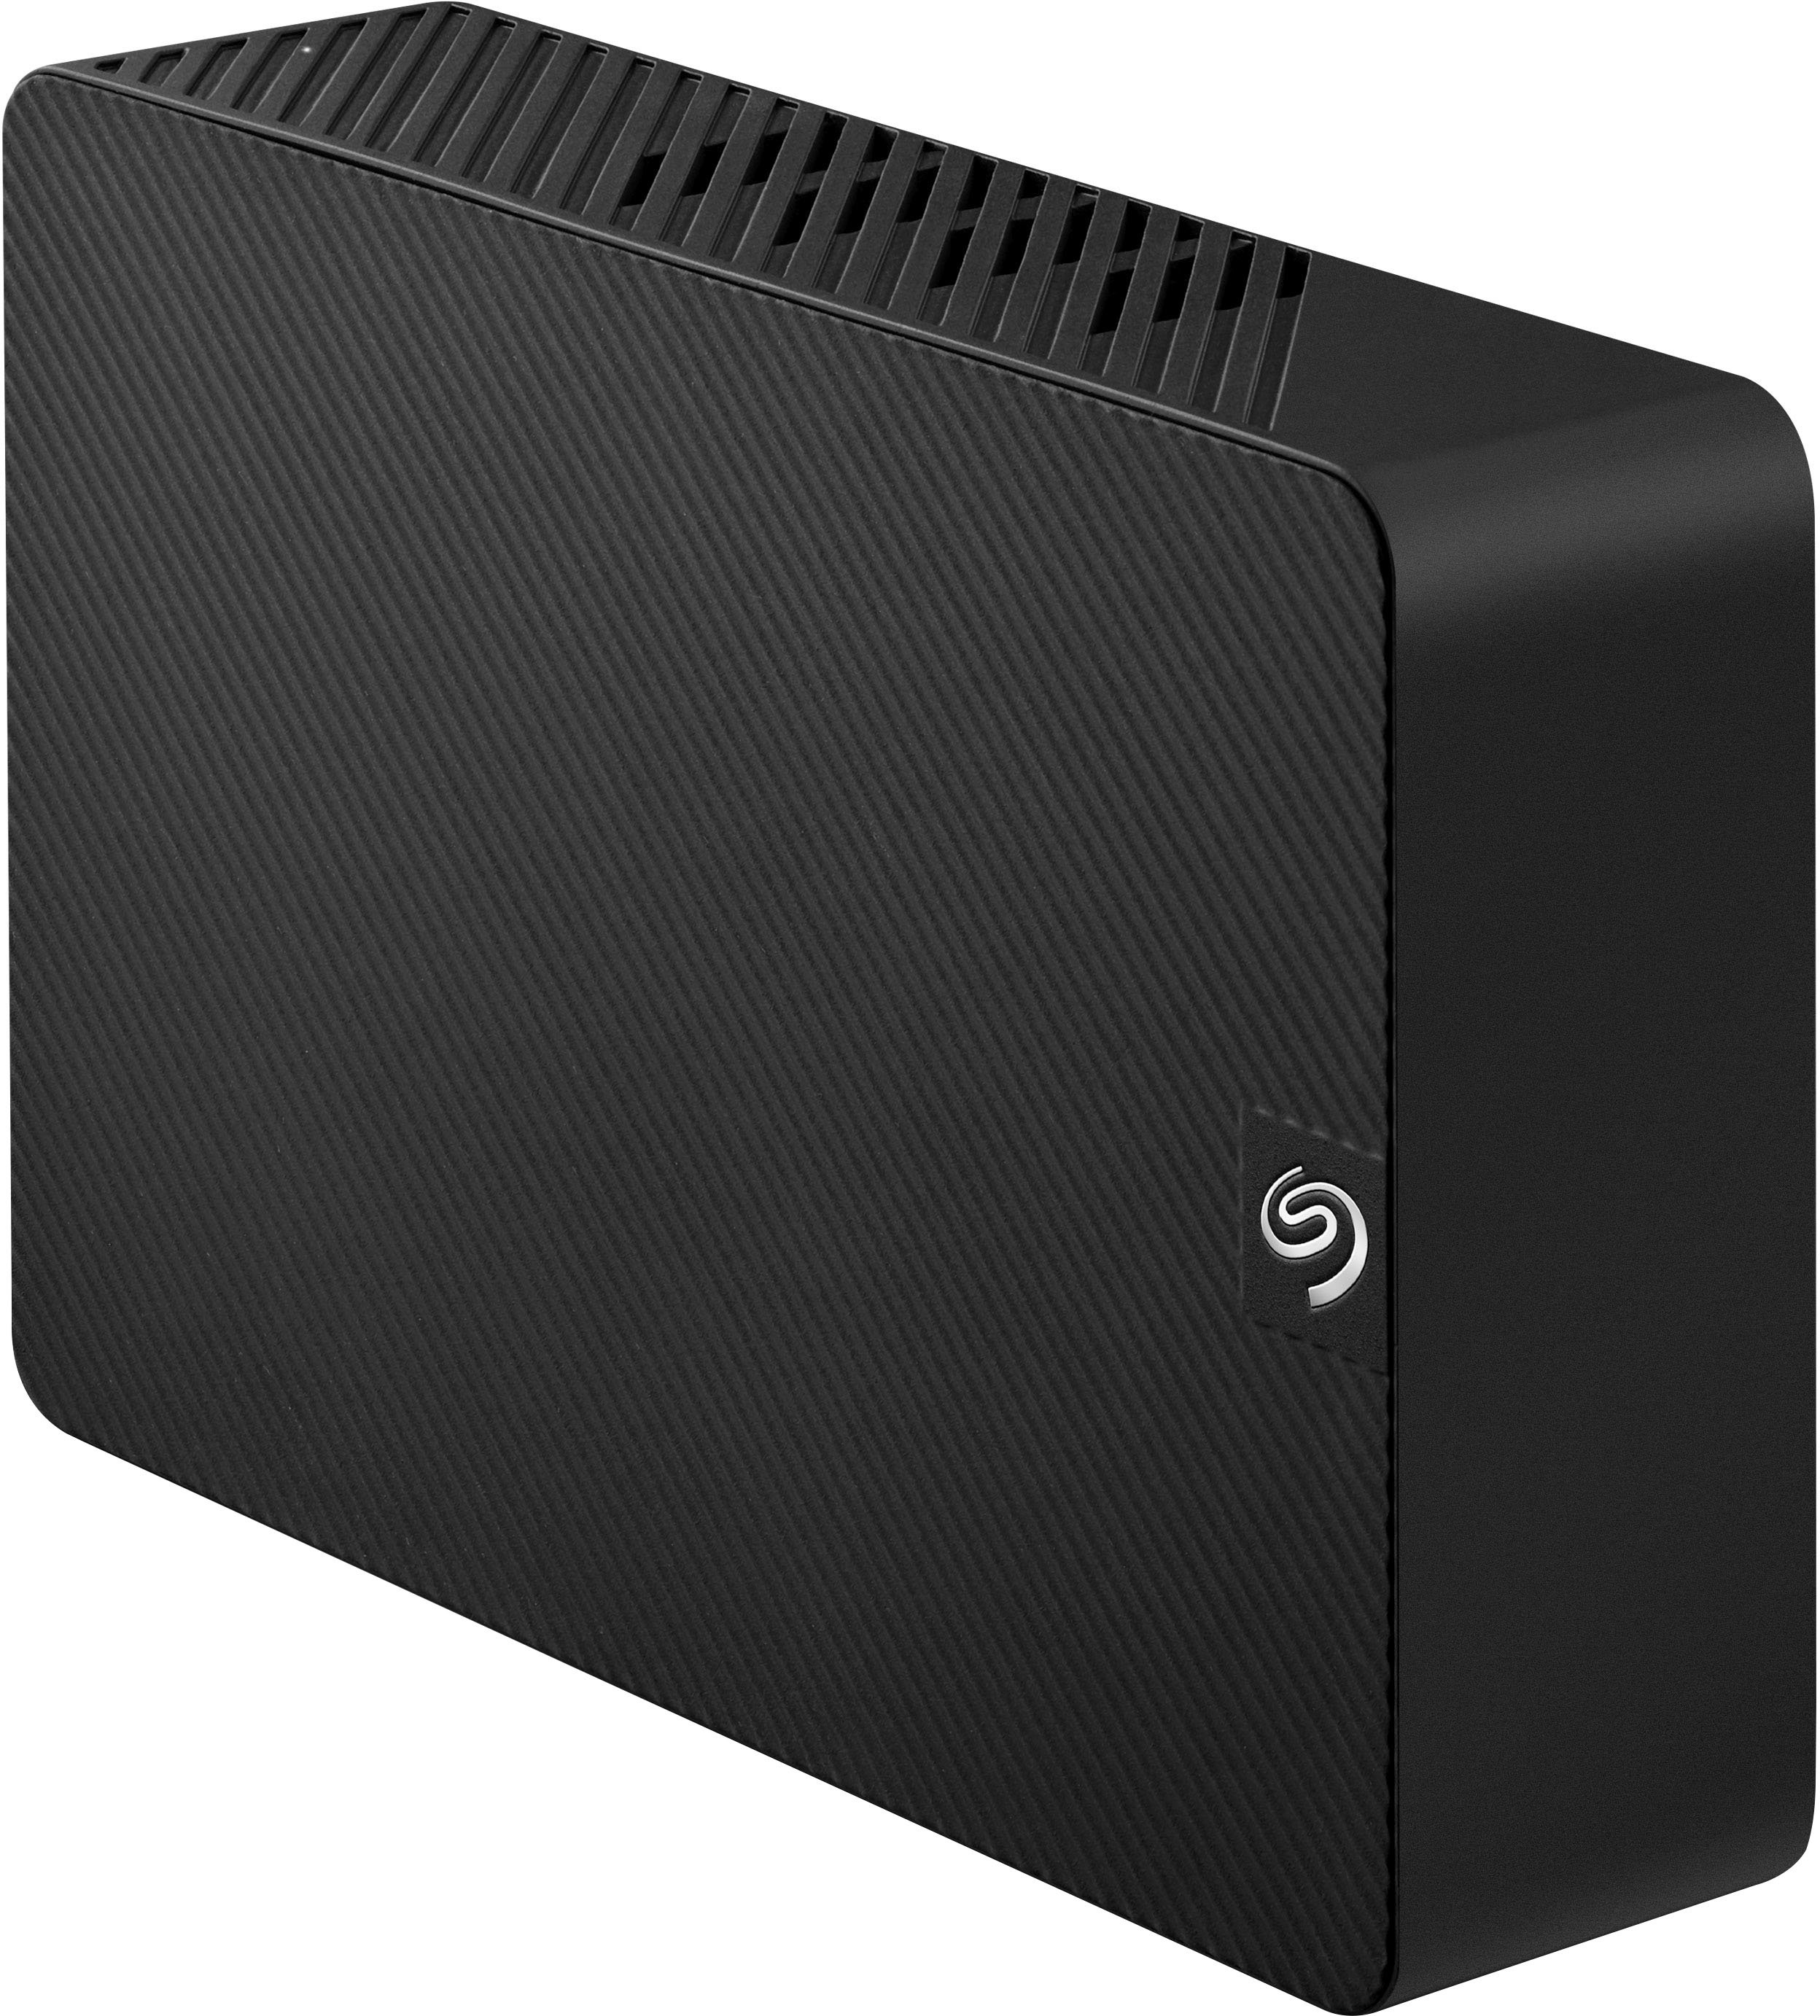 Seagate Expansion 18TB External USB 3.0 Desktop Hard Drive with